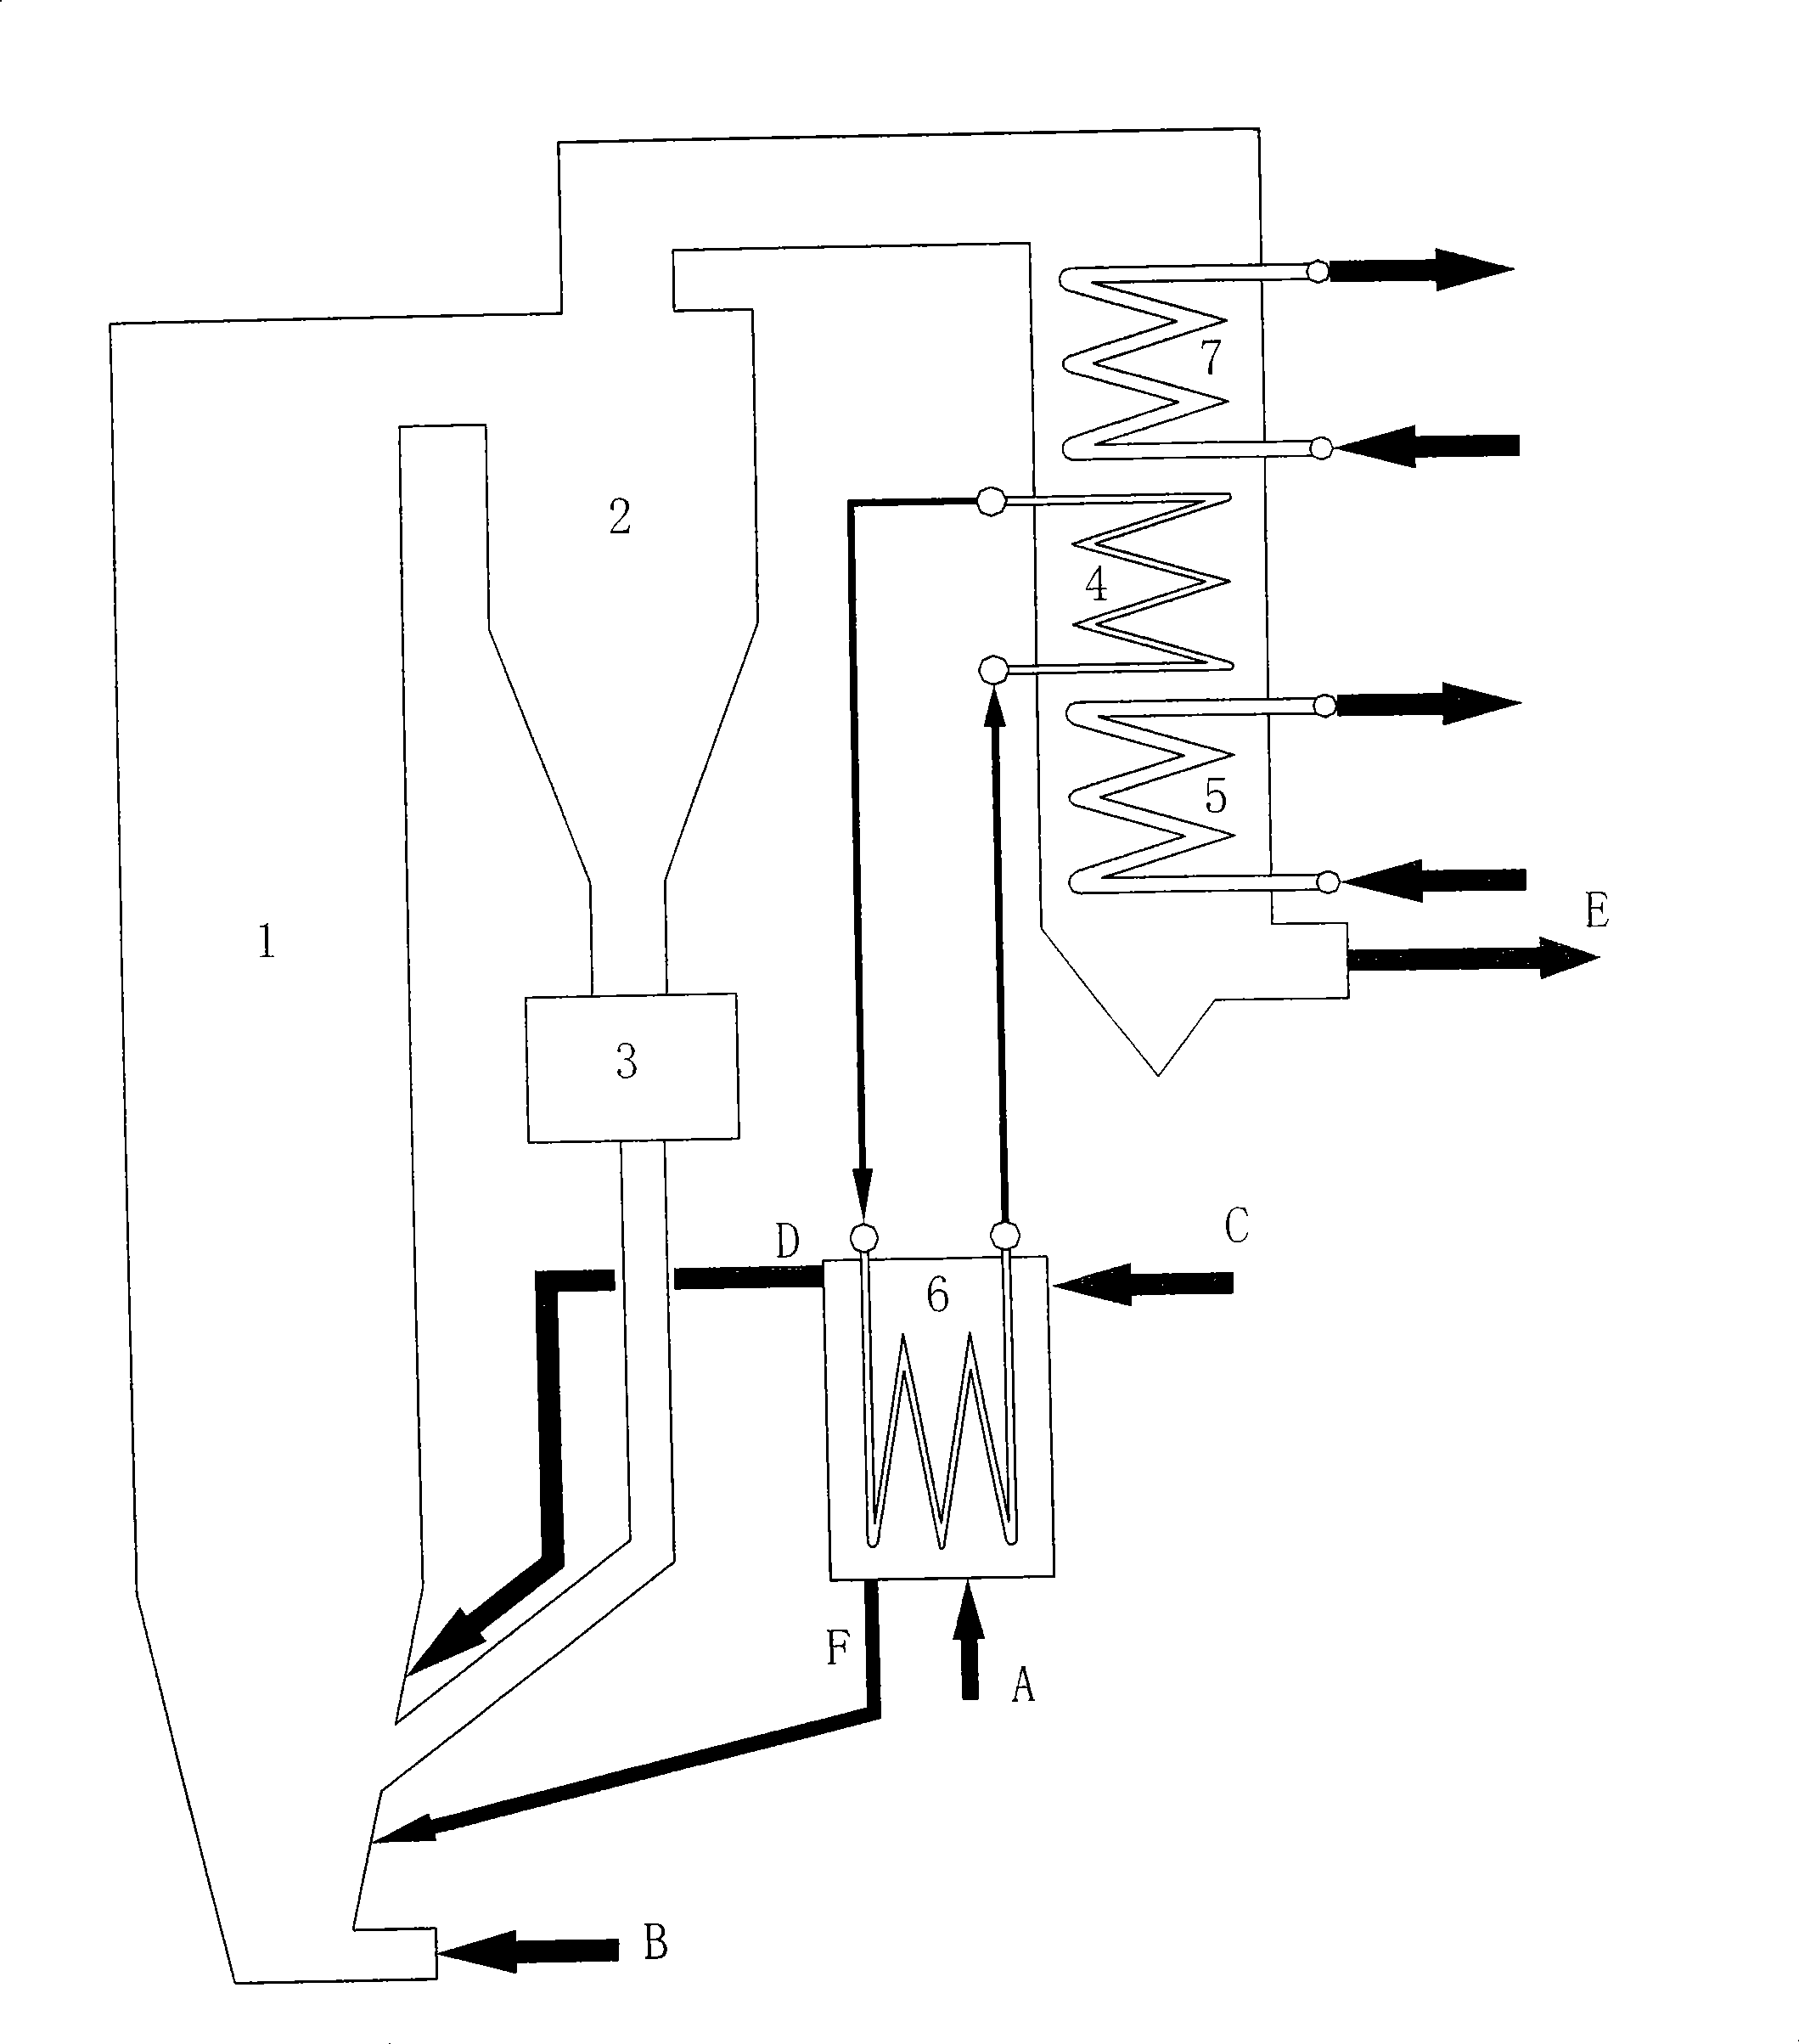 Anhydration and incineration processing method for wet sludge